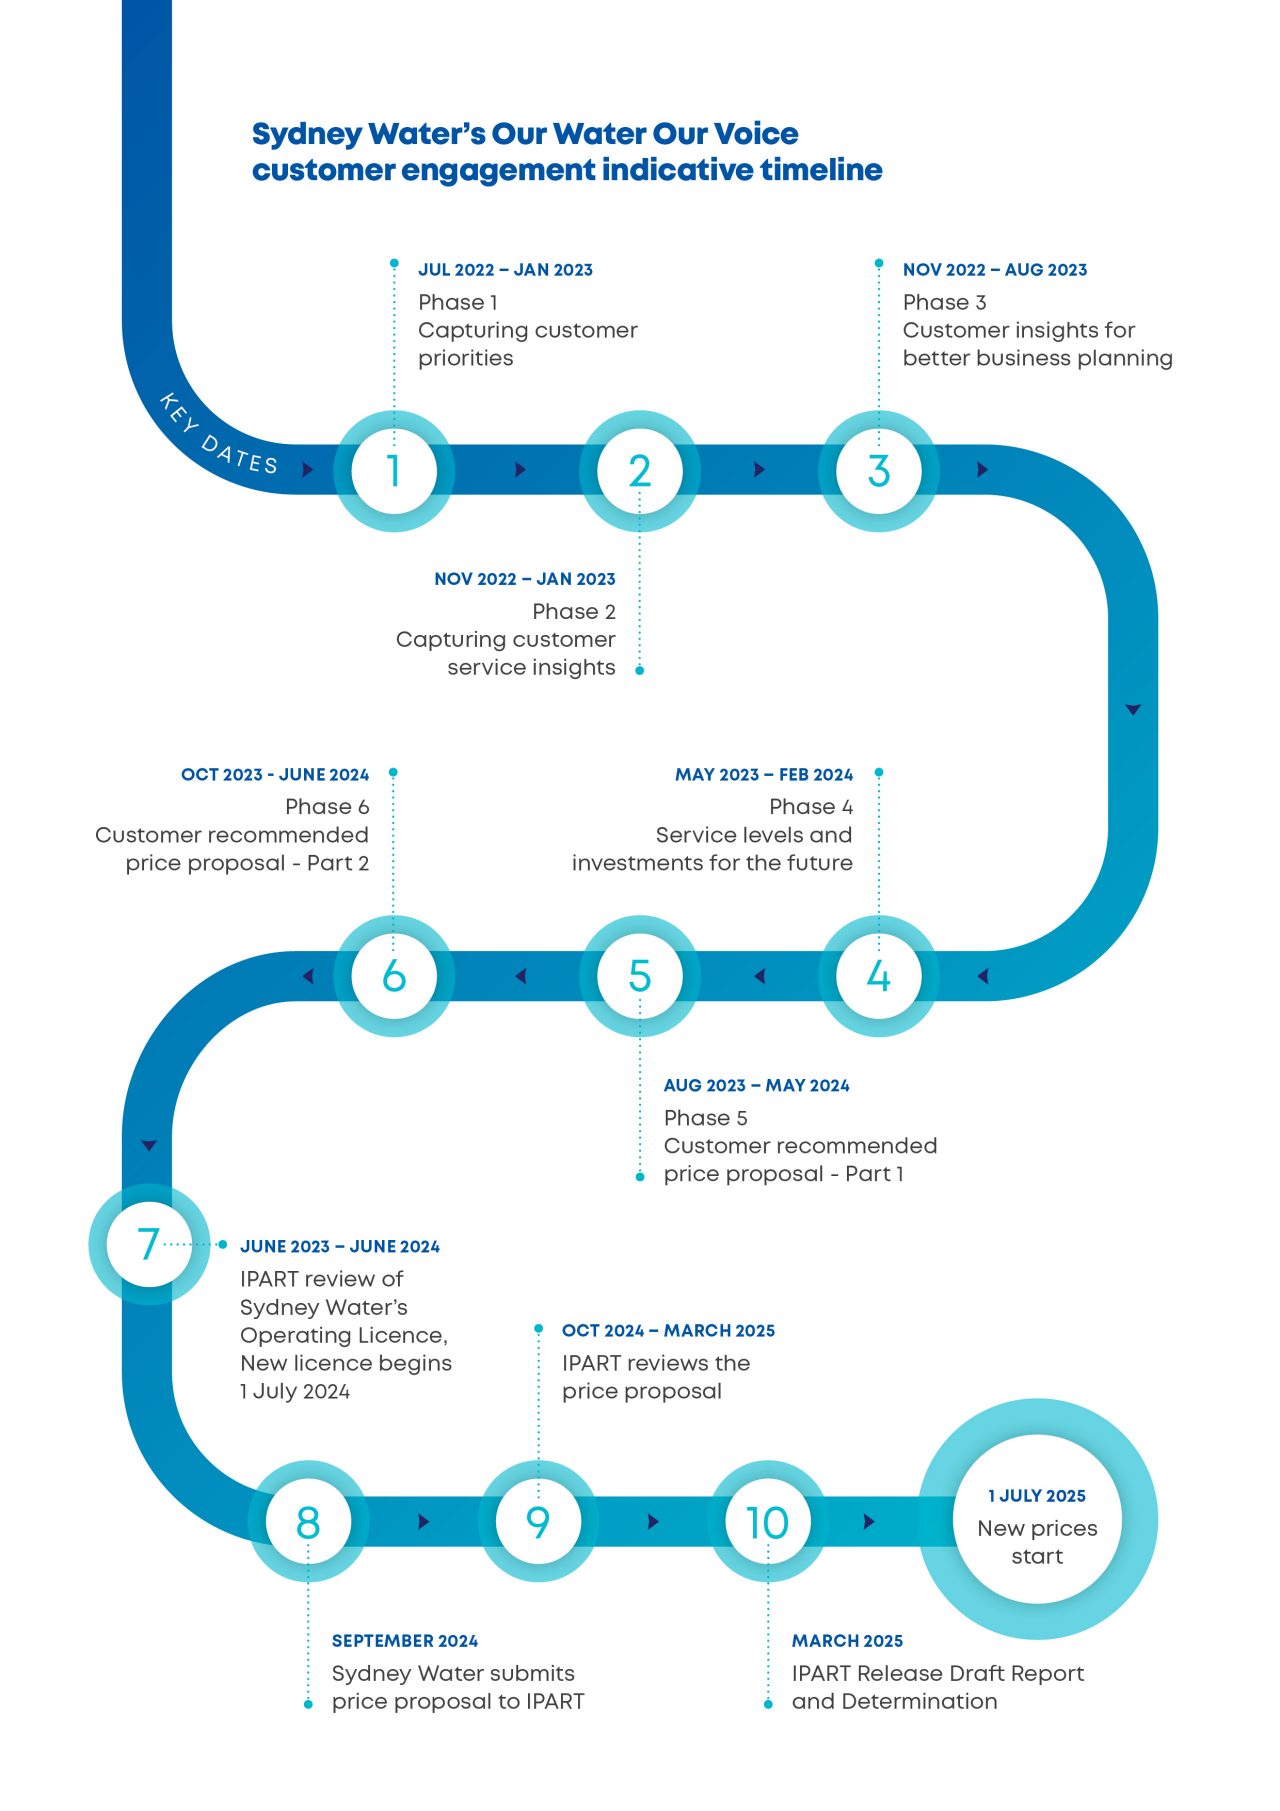 Our Water our Voice Customer Engagement Timeline